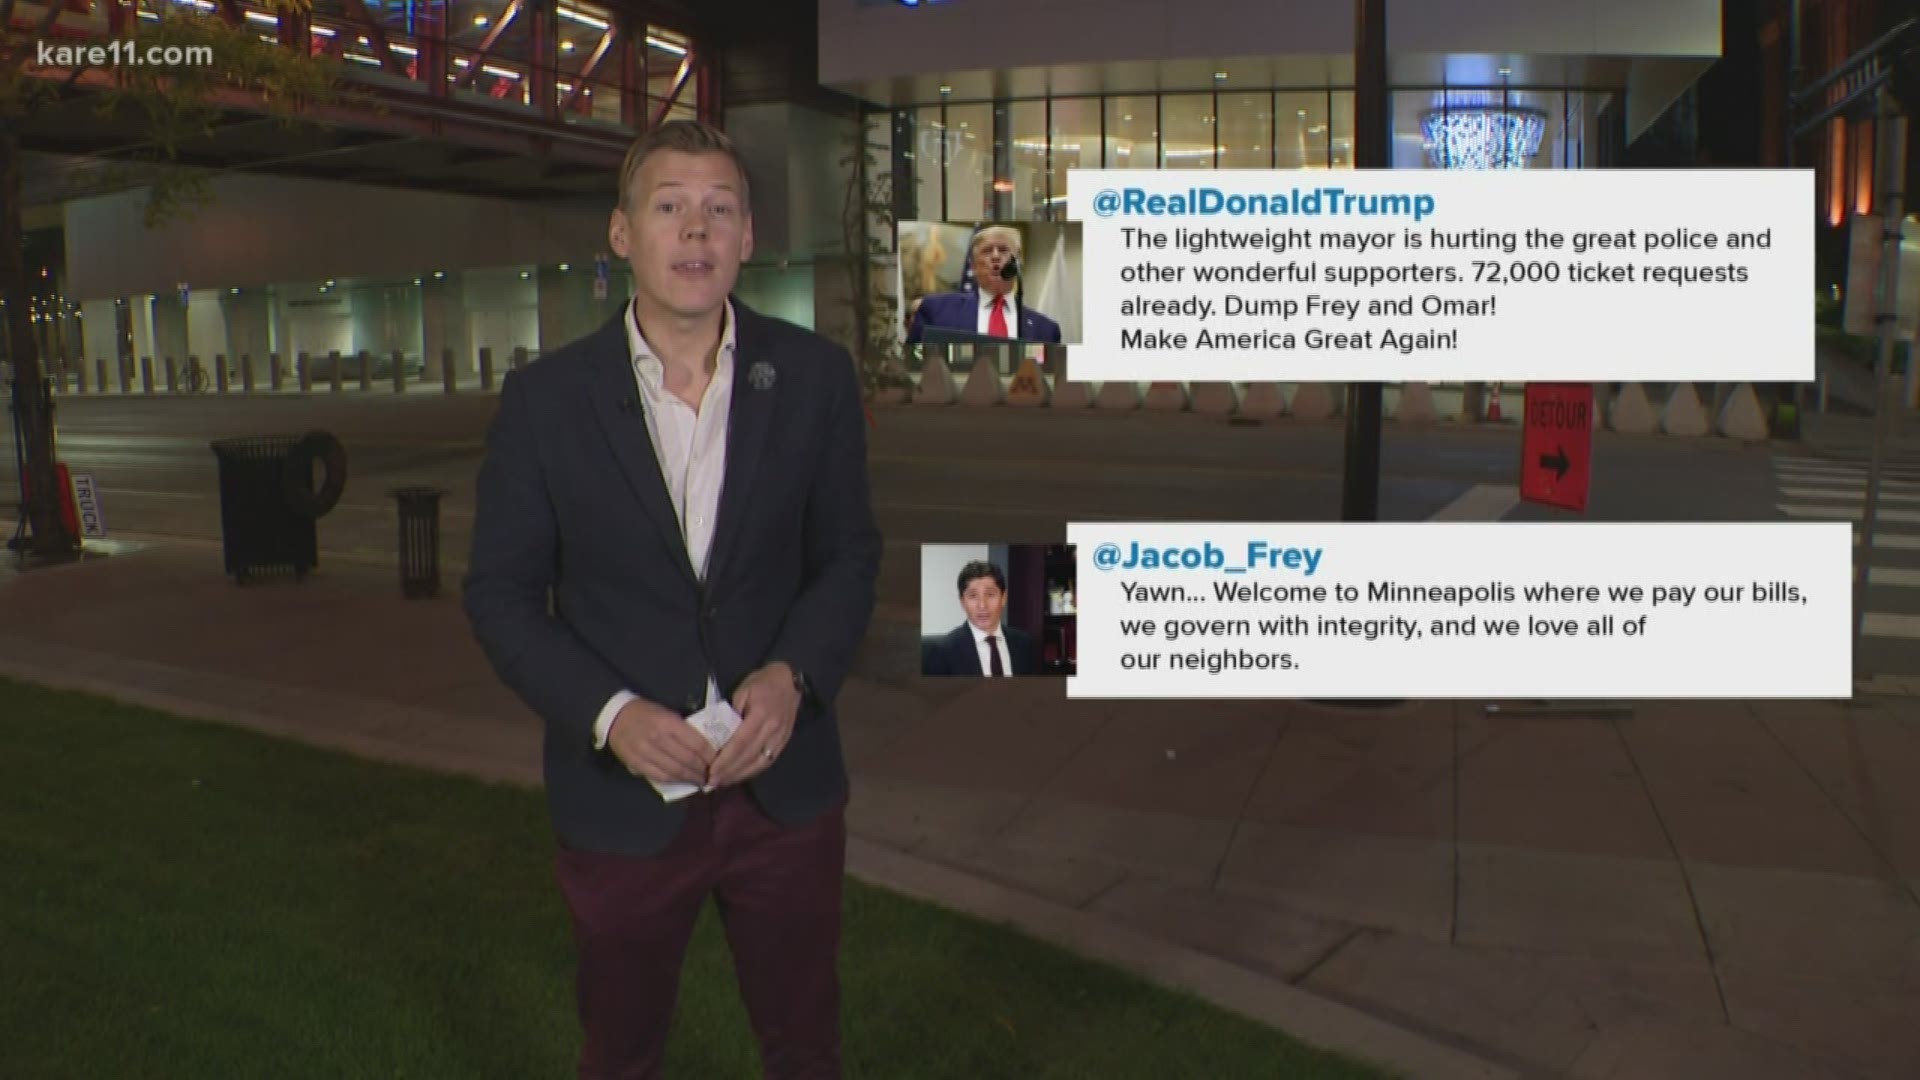 The tweets were flying today between President Trump and Minneapolis Mayor Jacob Frey about who is gonna foot the bill for the big rally Thursday.